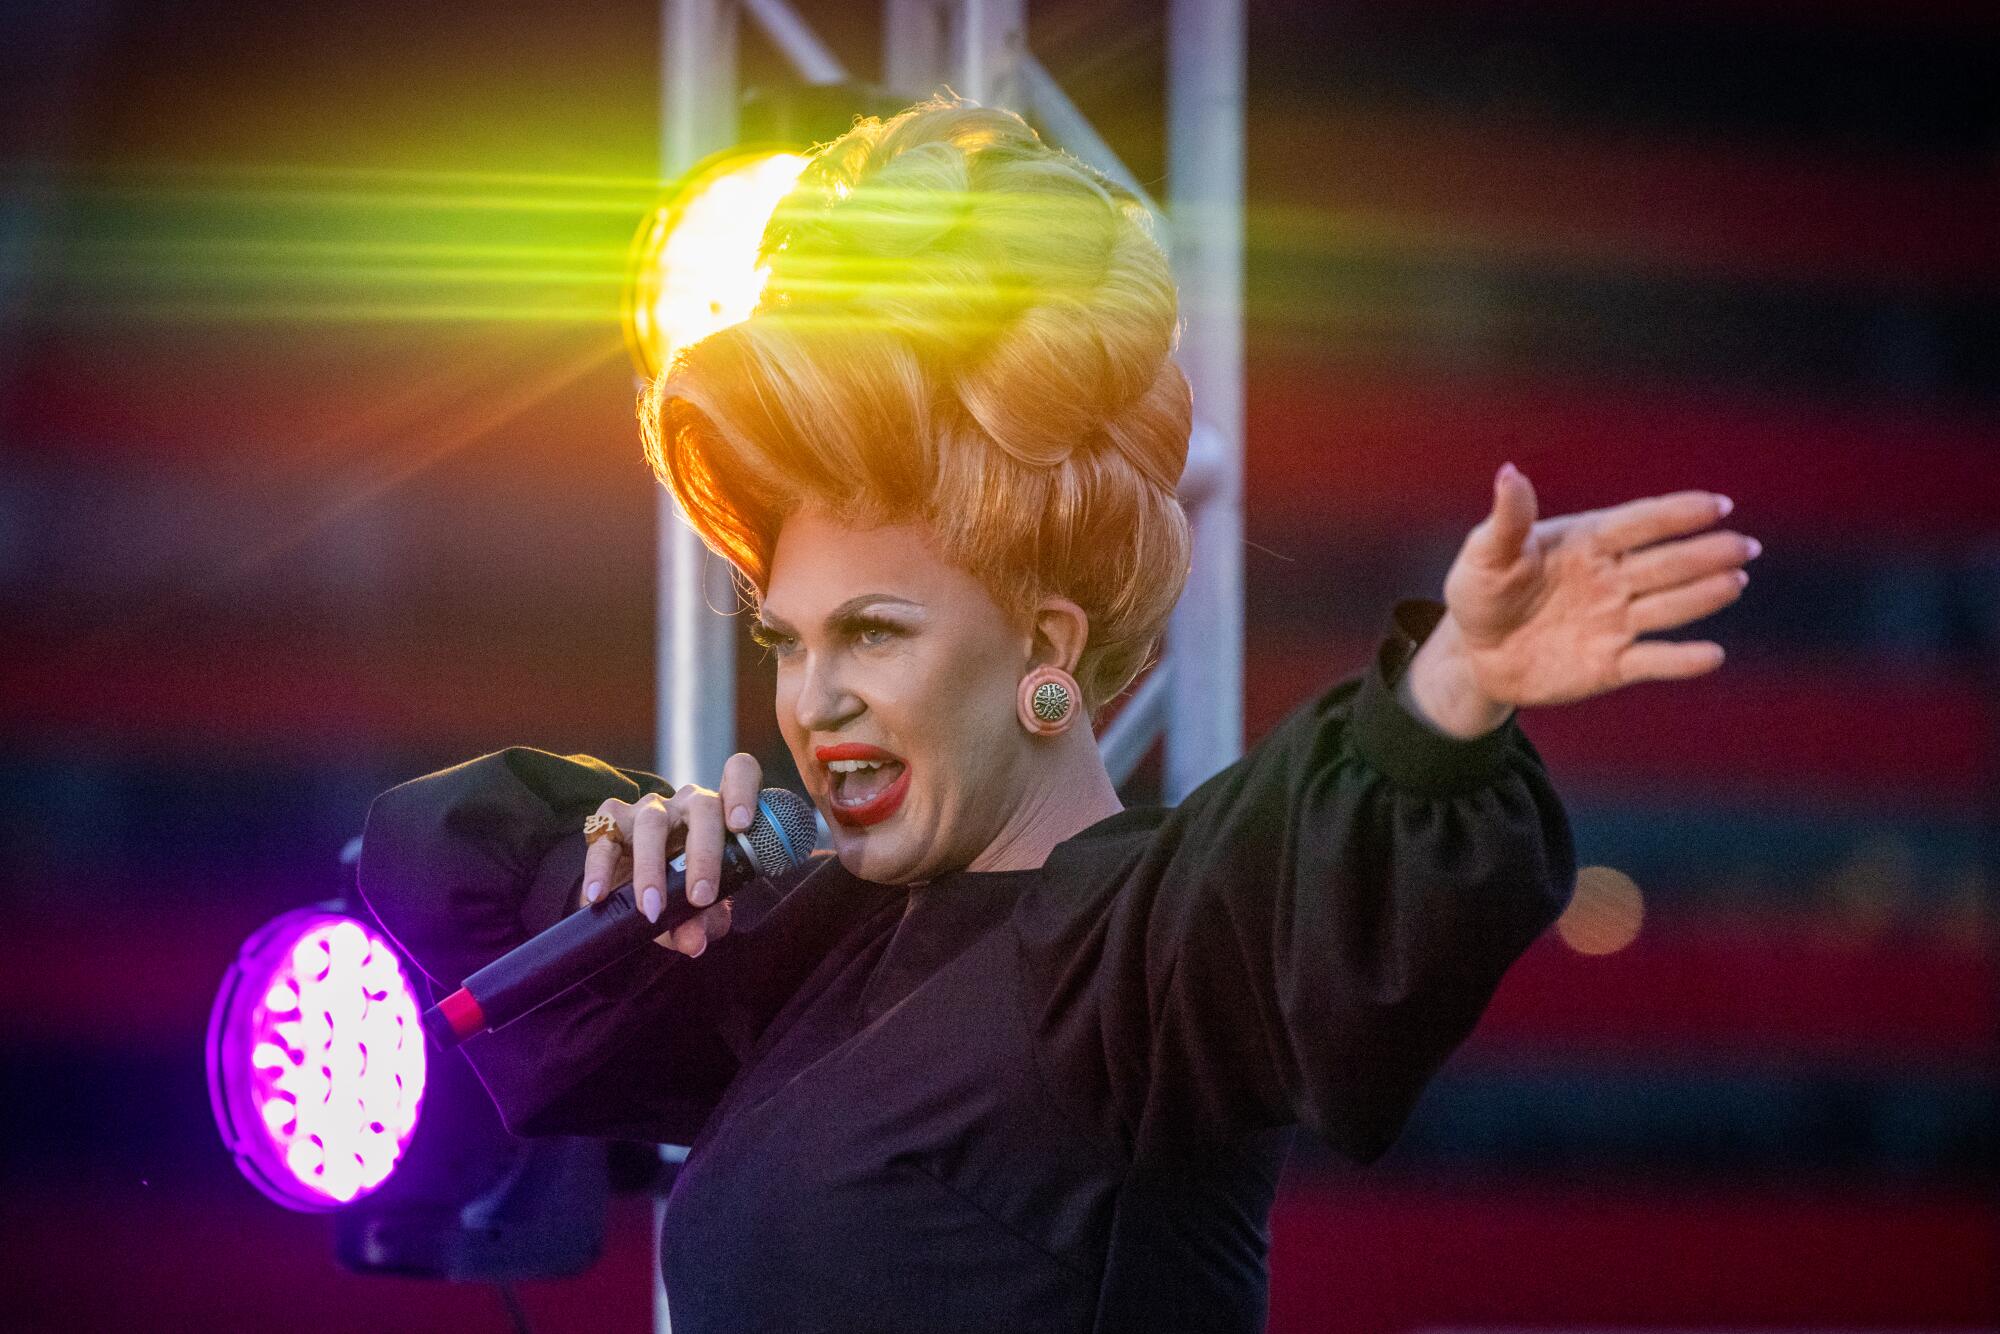 A drag performer on stage holding a microphone in one hand.